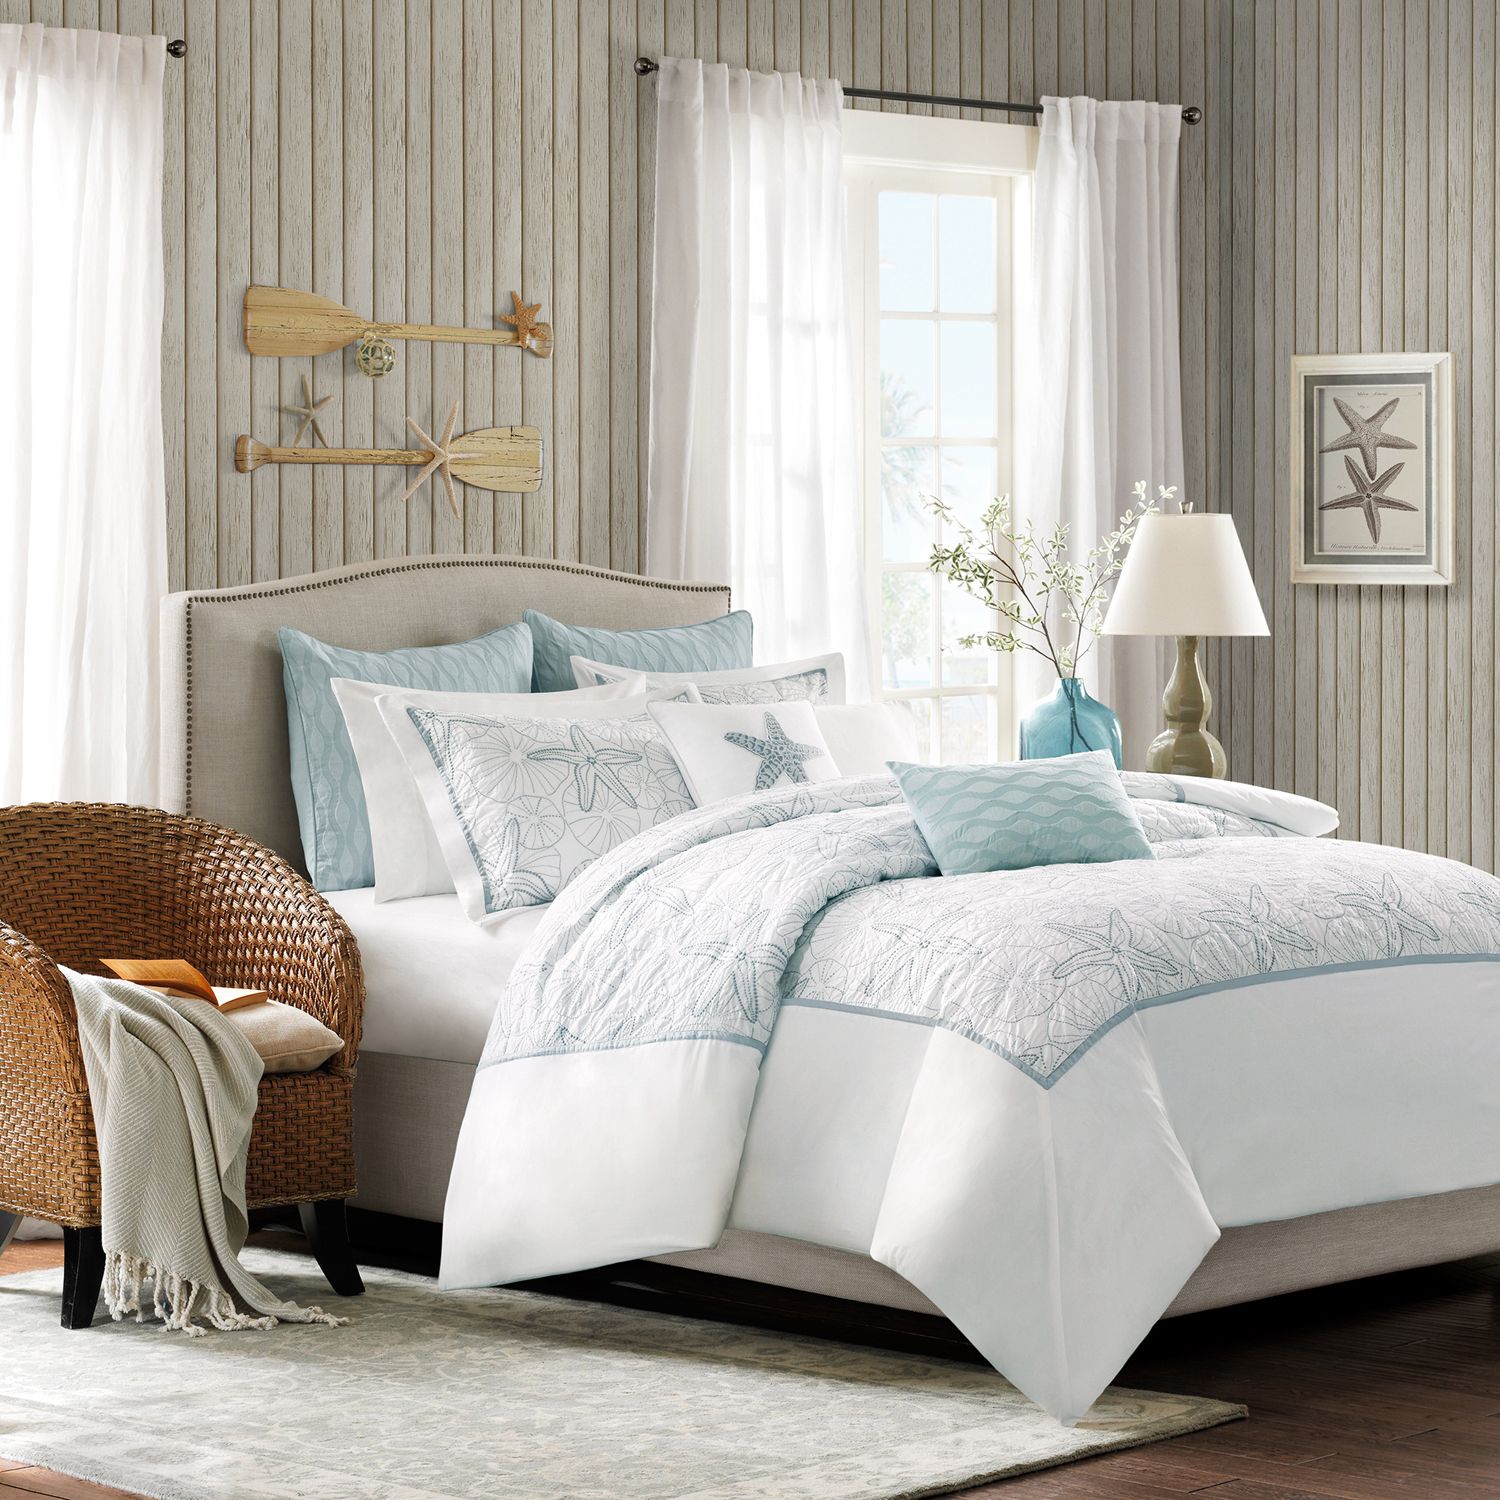 Image for Harbor House Maya Bay Duvet Cover Collection at Kohl's.